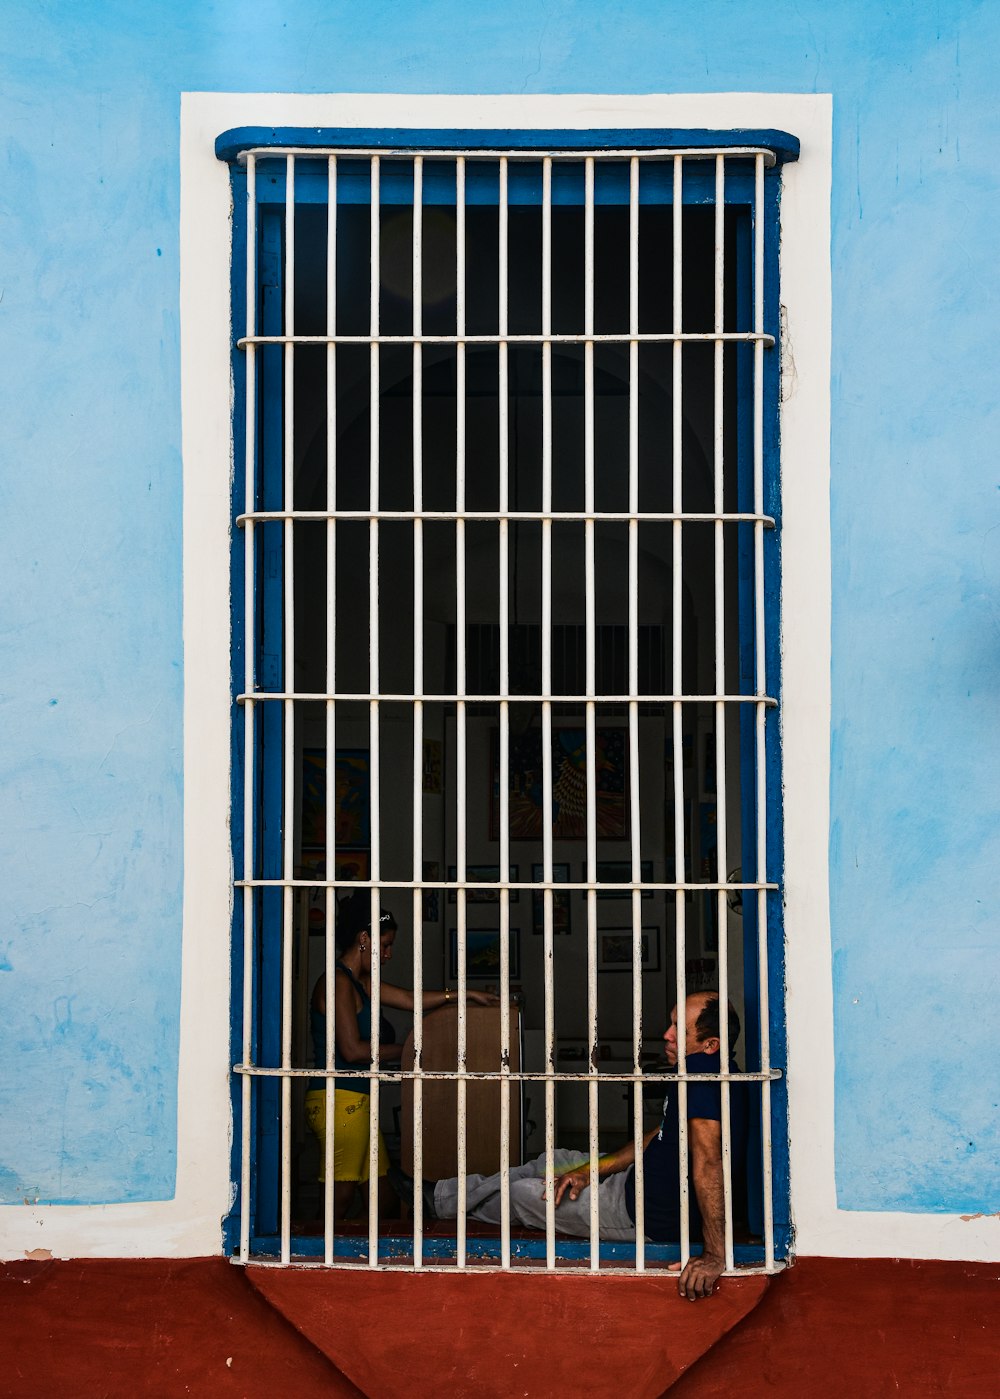 a man sitting in a jail cell behind bars